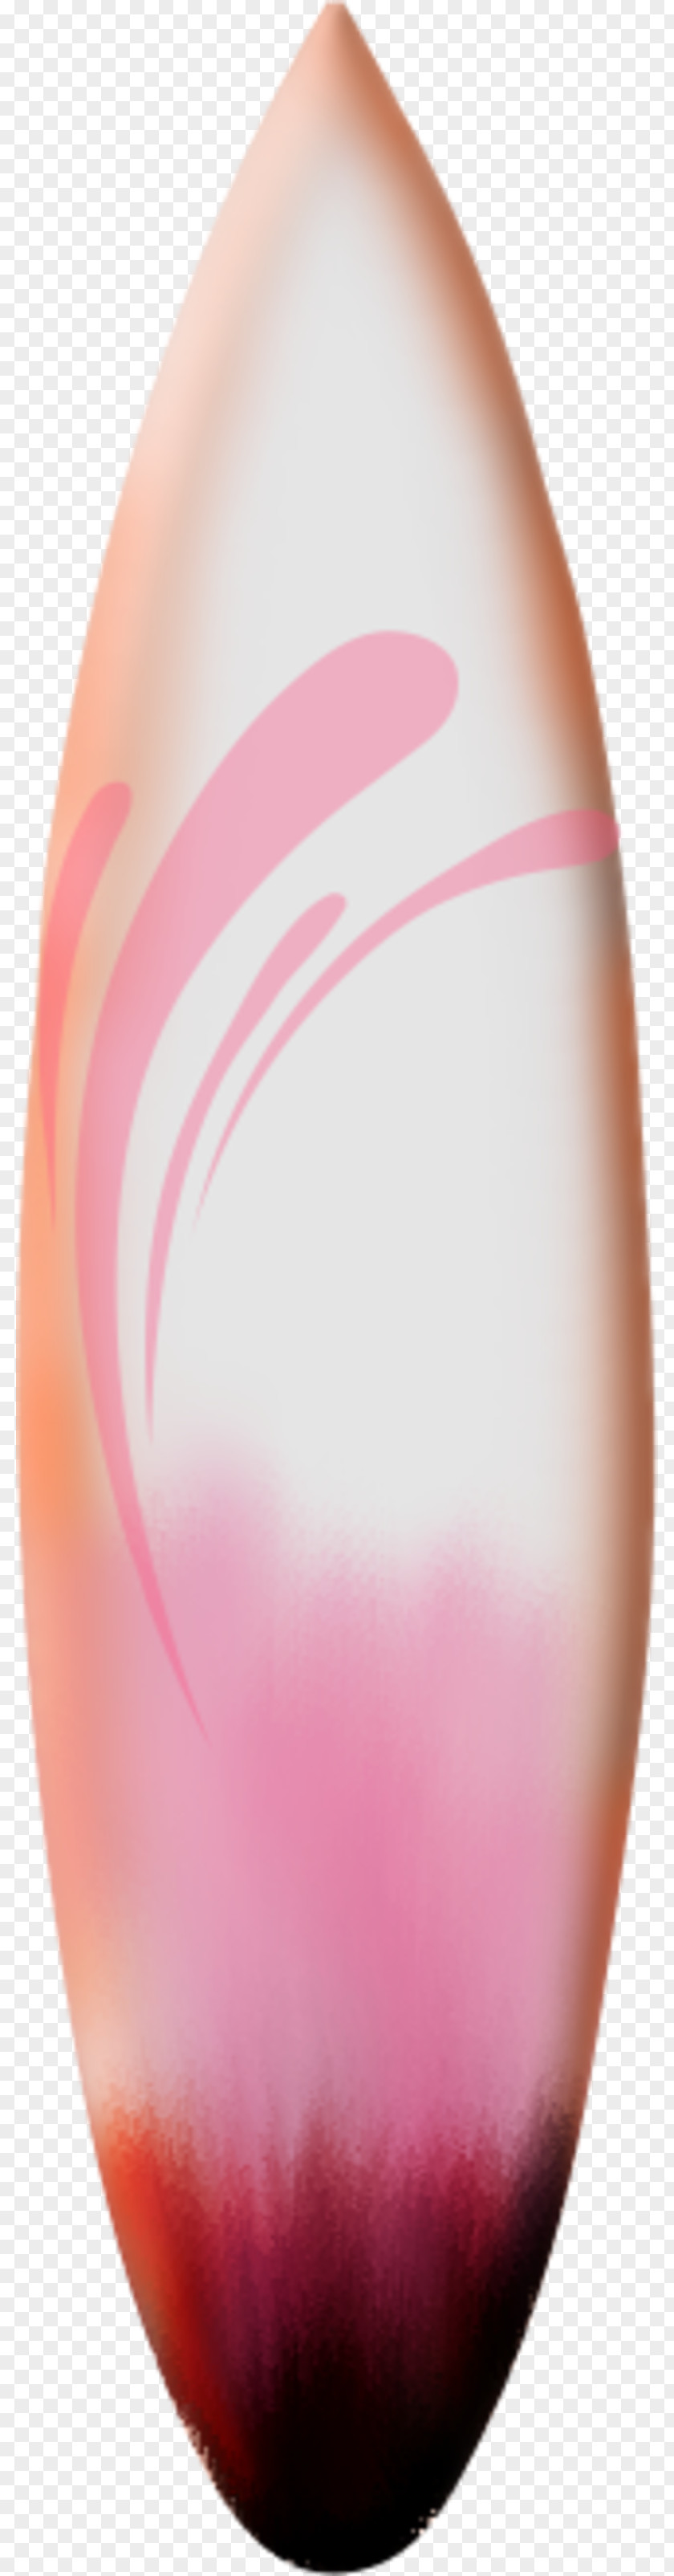 Surfing Surfboard Plank Egg PNG